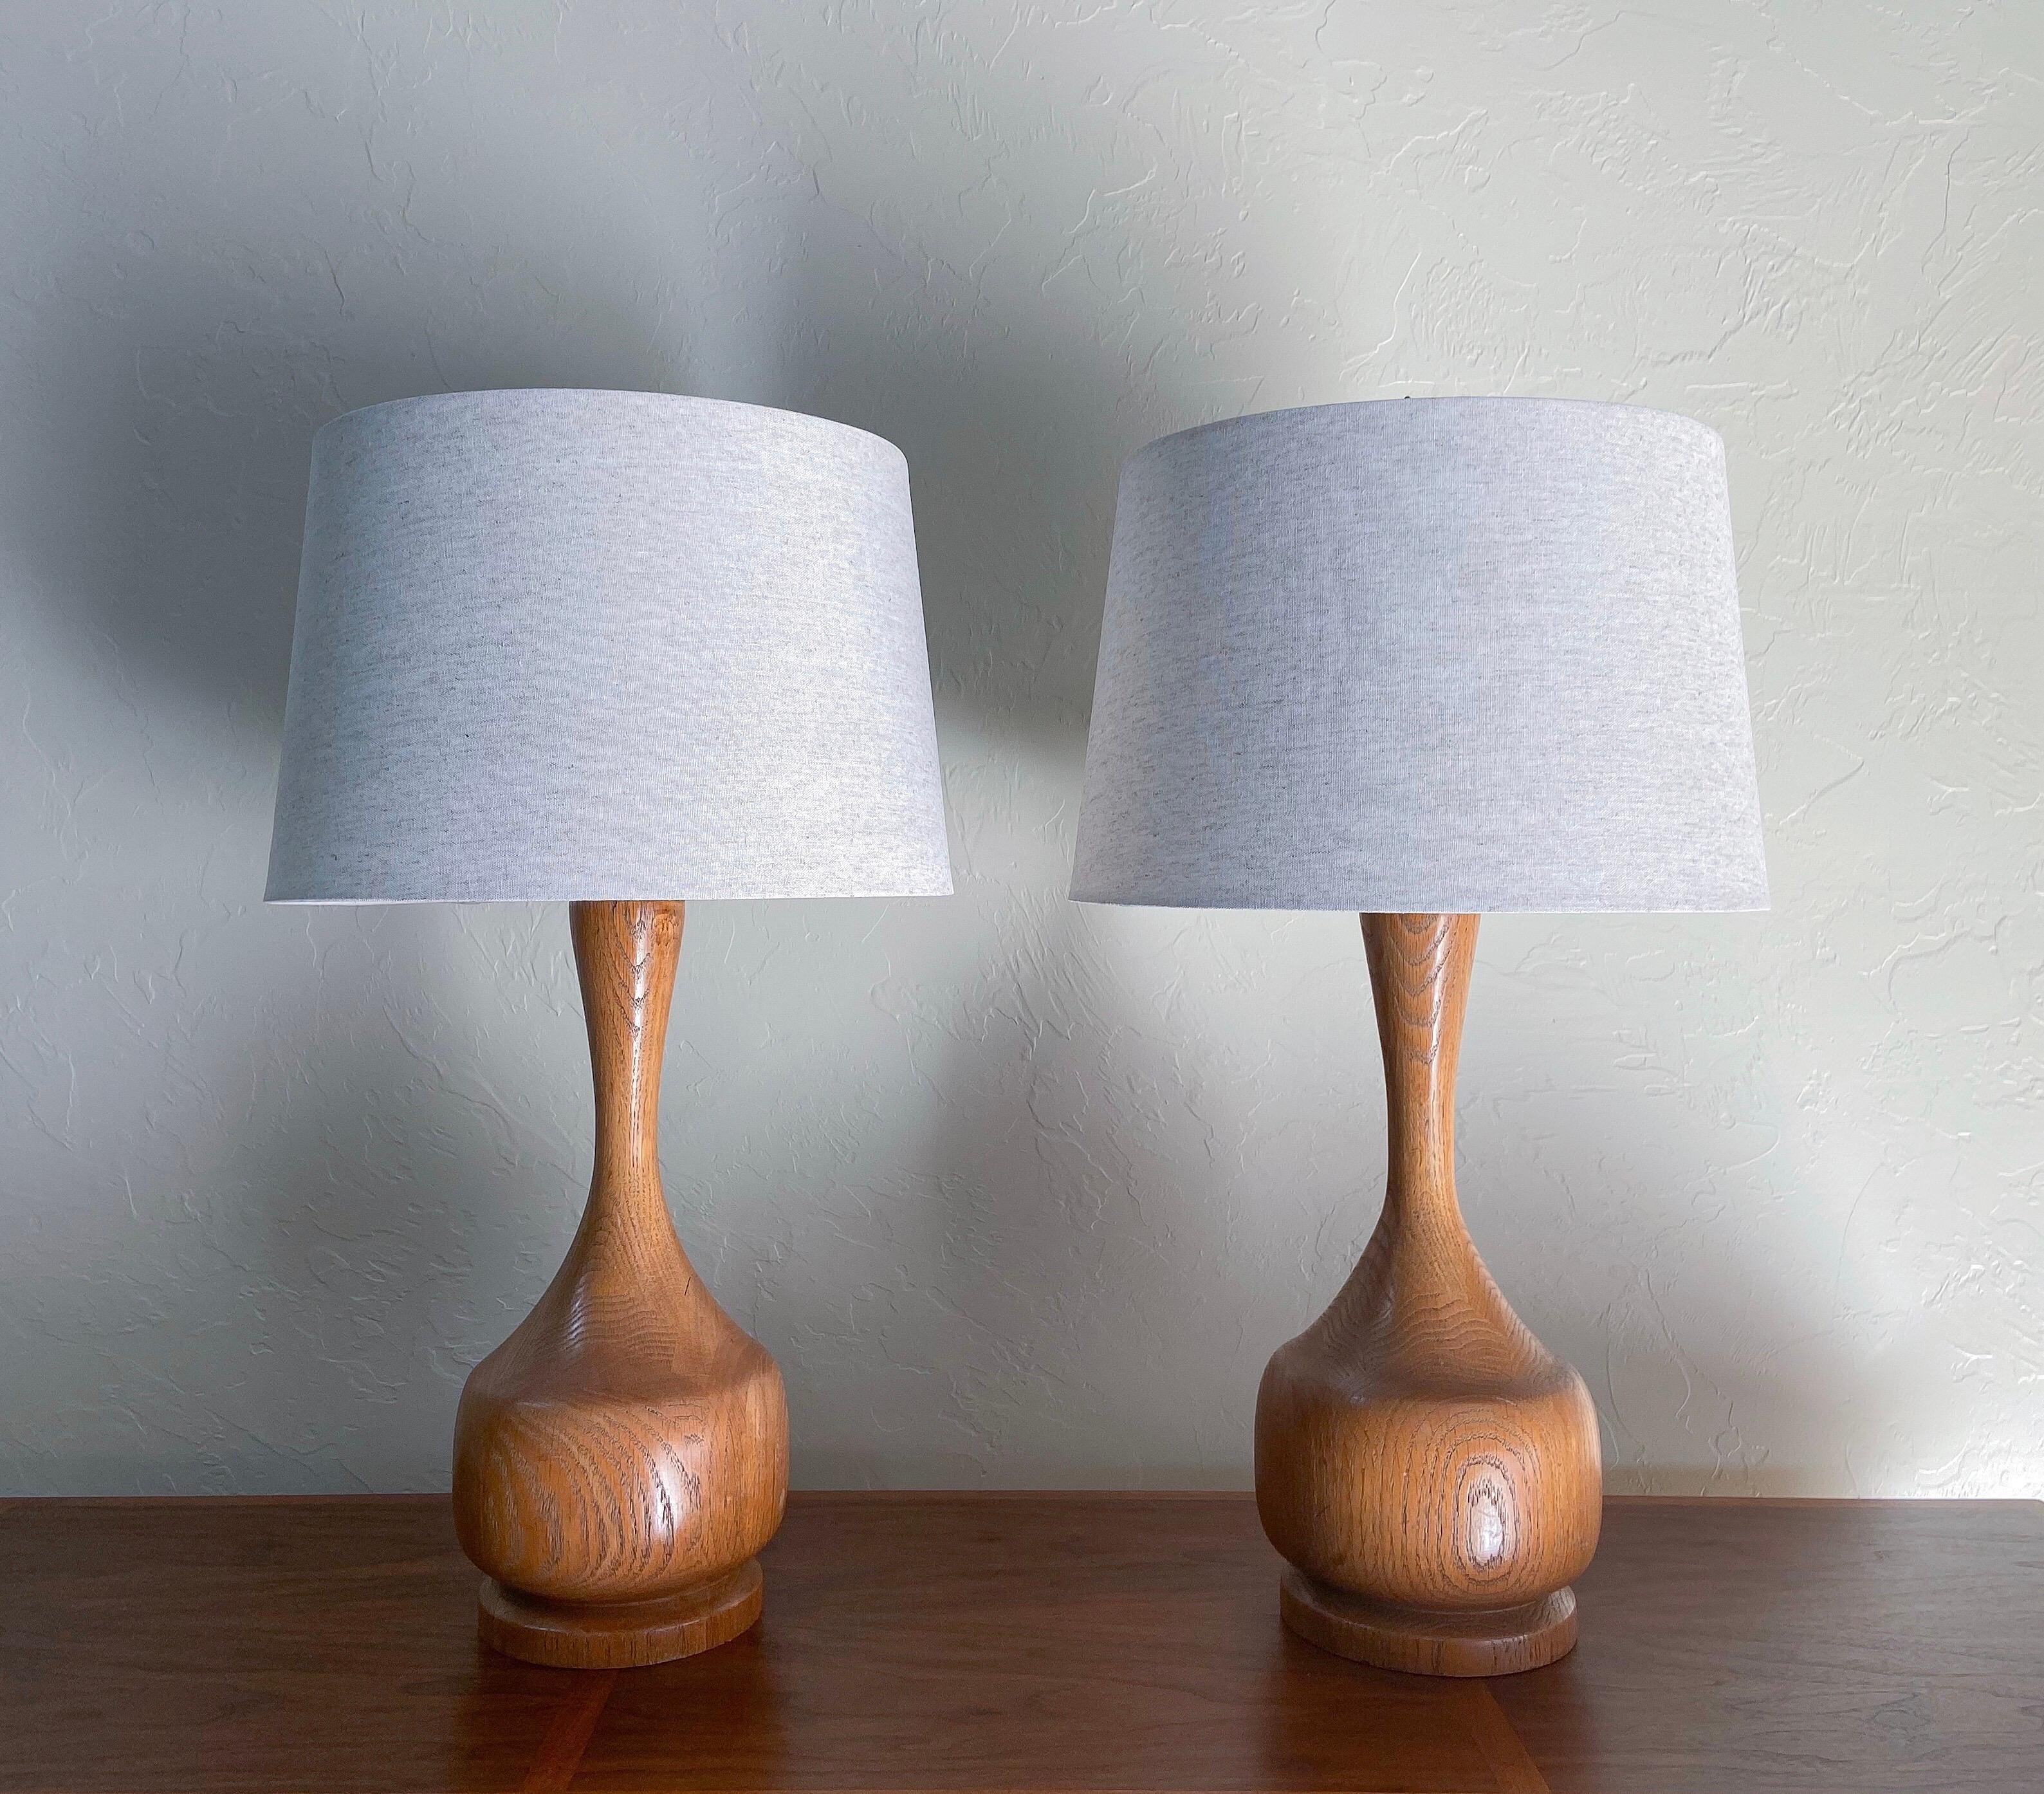 A wonderful one of a kind pair of lathe turned table lamps circa 1970. 

These are very well executed. Made from solid oak and featuring a lovely organic form. Oak has a natural warmth 

These will be a great addition to any Mid-Century Modern,